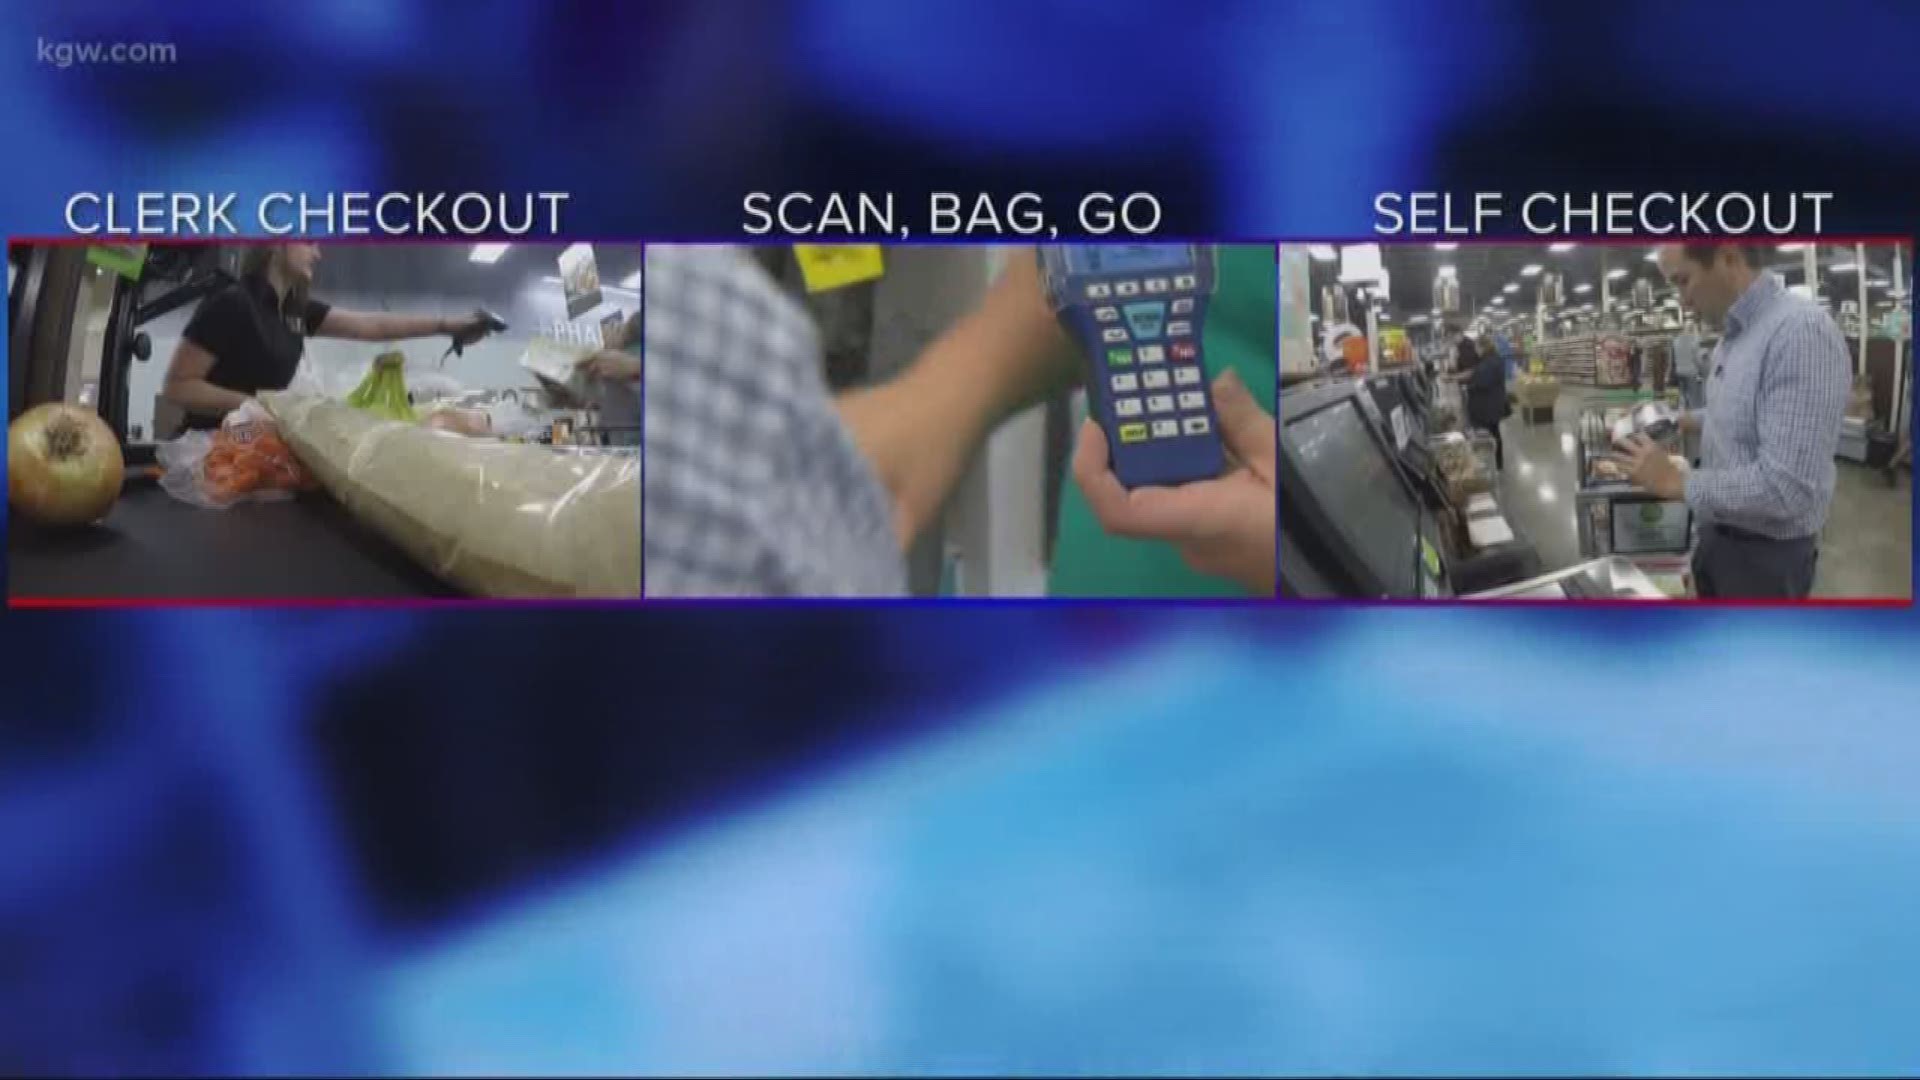 KGW investigative reporter Kyle Iboshi went to the grocery store with a shopping list. He timed which system is fastest -- self scan, self checkout or the traditional grocery clerk.